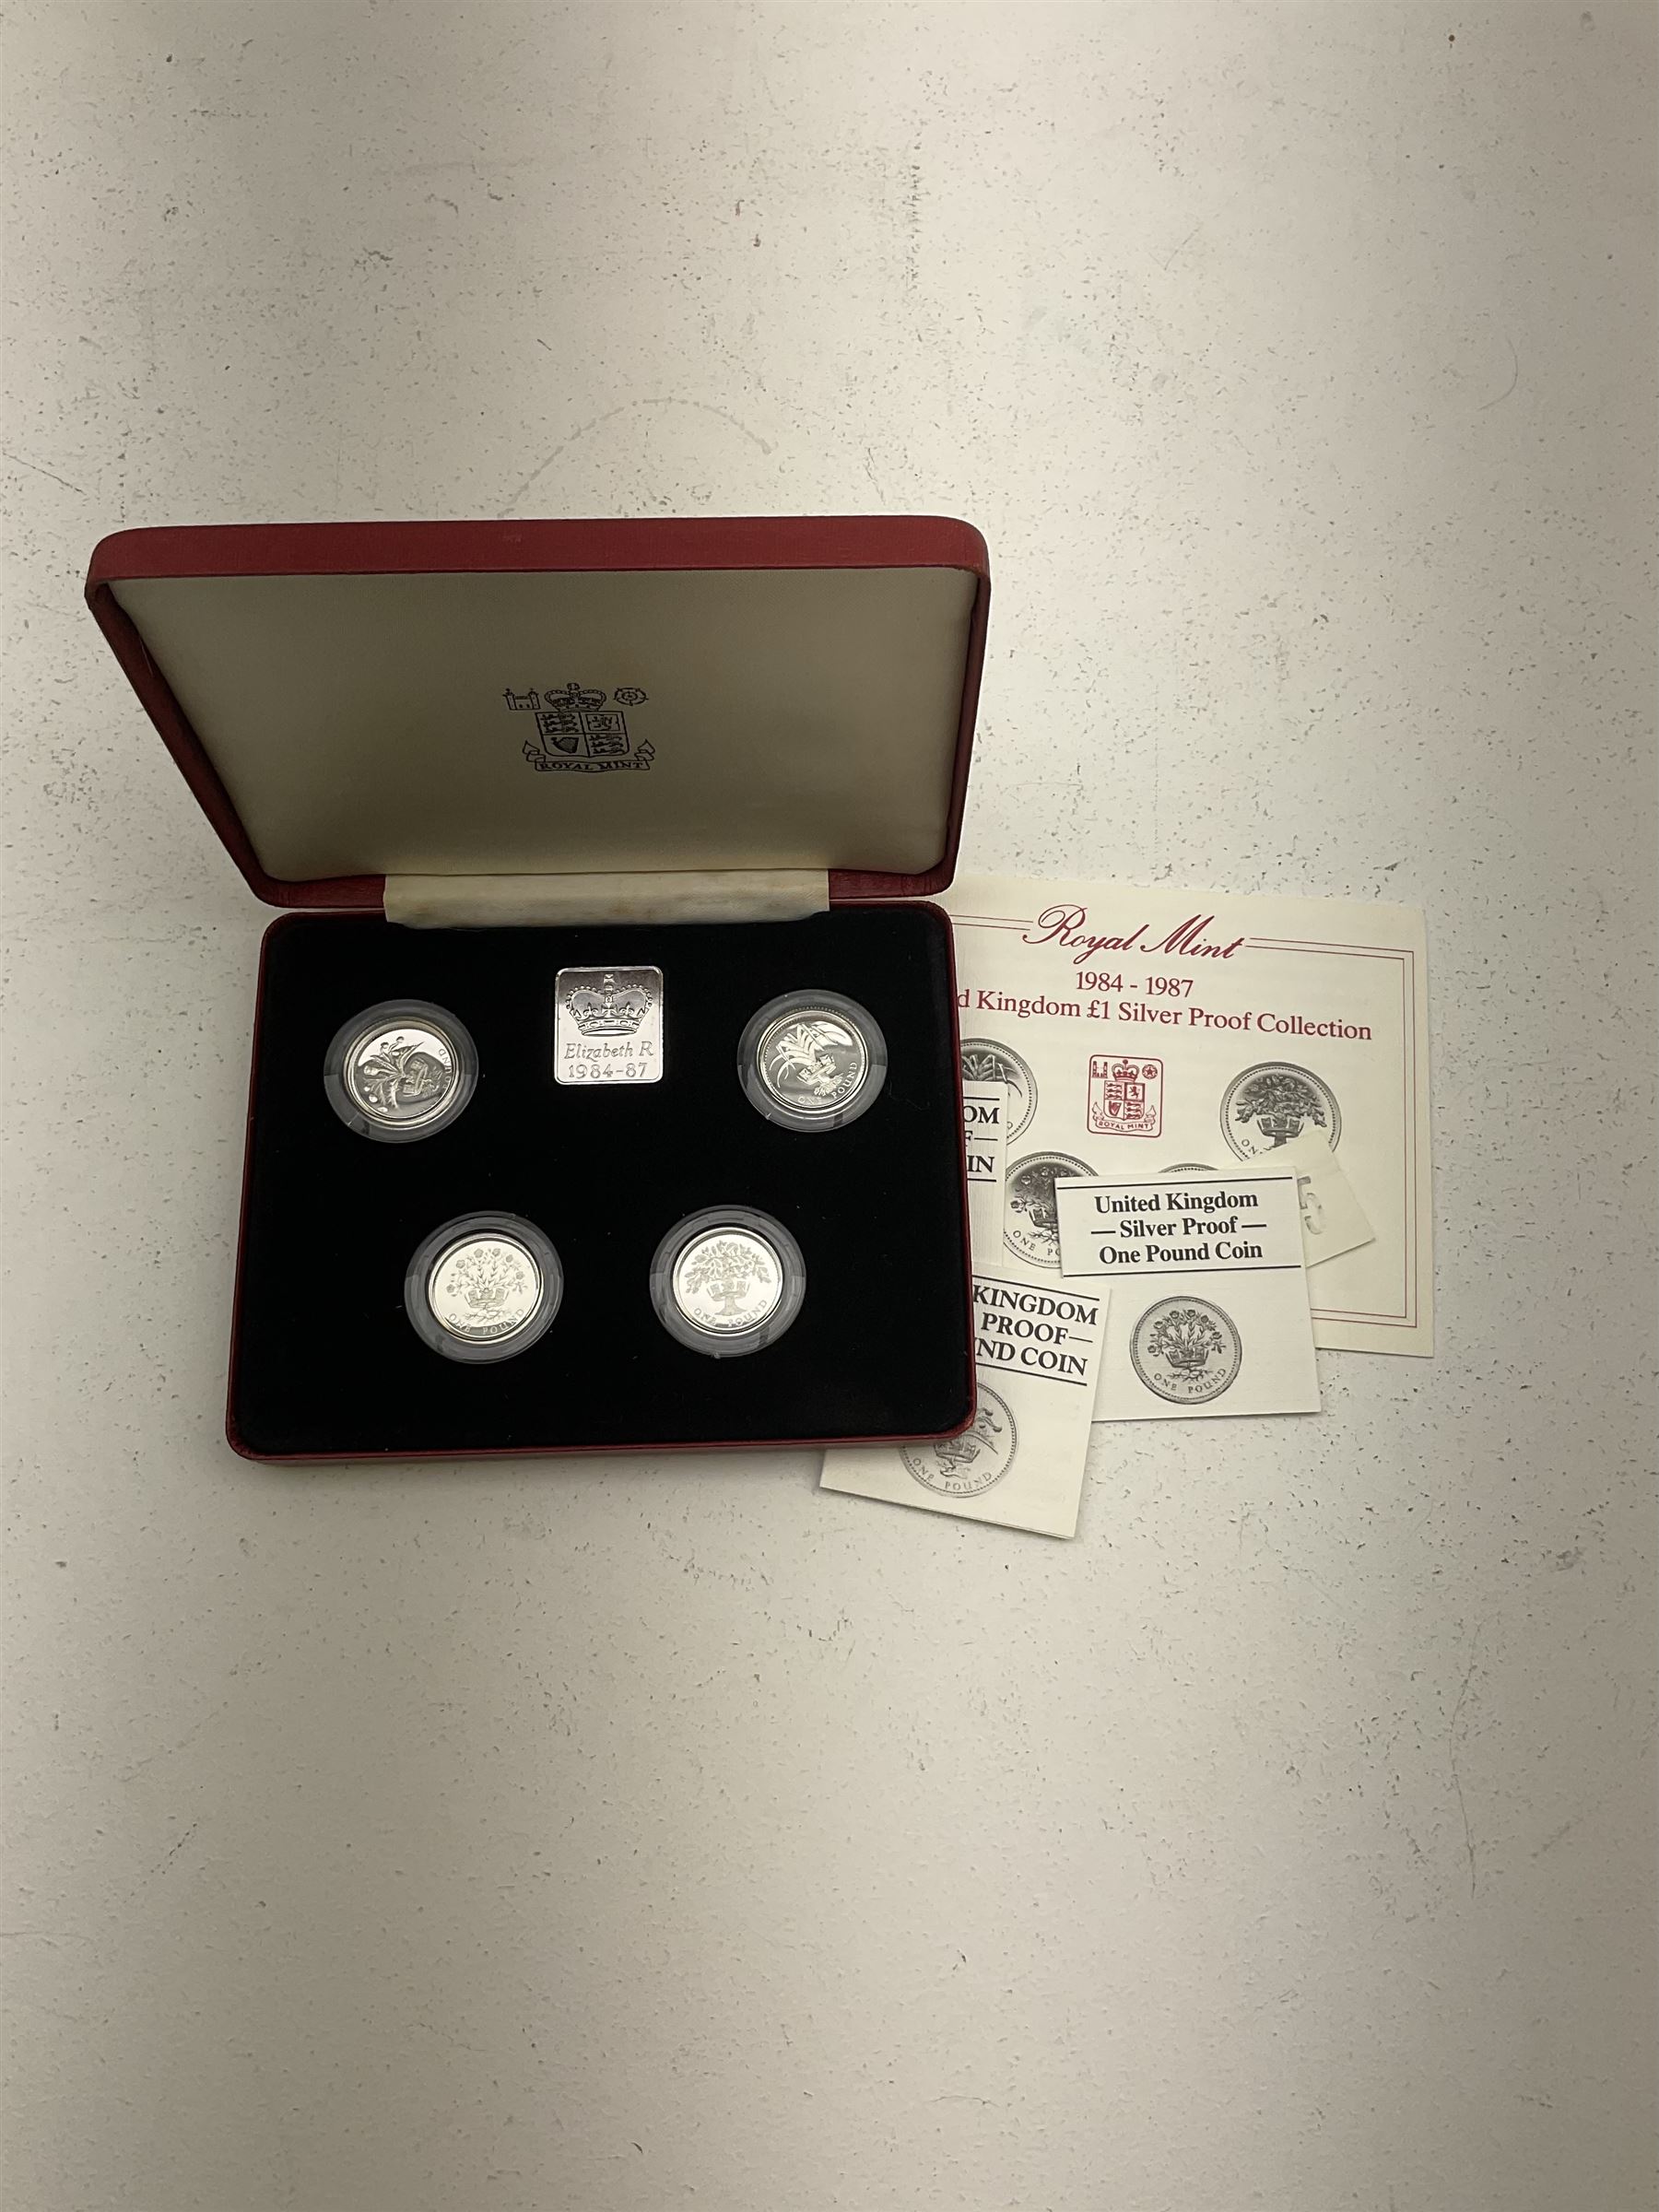 The Royal Mint United Kingdom 1984 to 1987 silver proof one pound coin collection and 1984 to 1987 s - Image 3 of 4